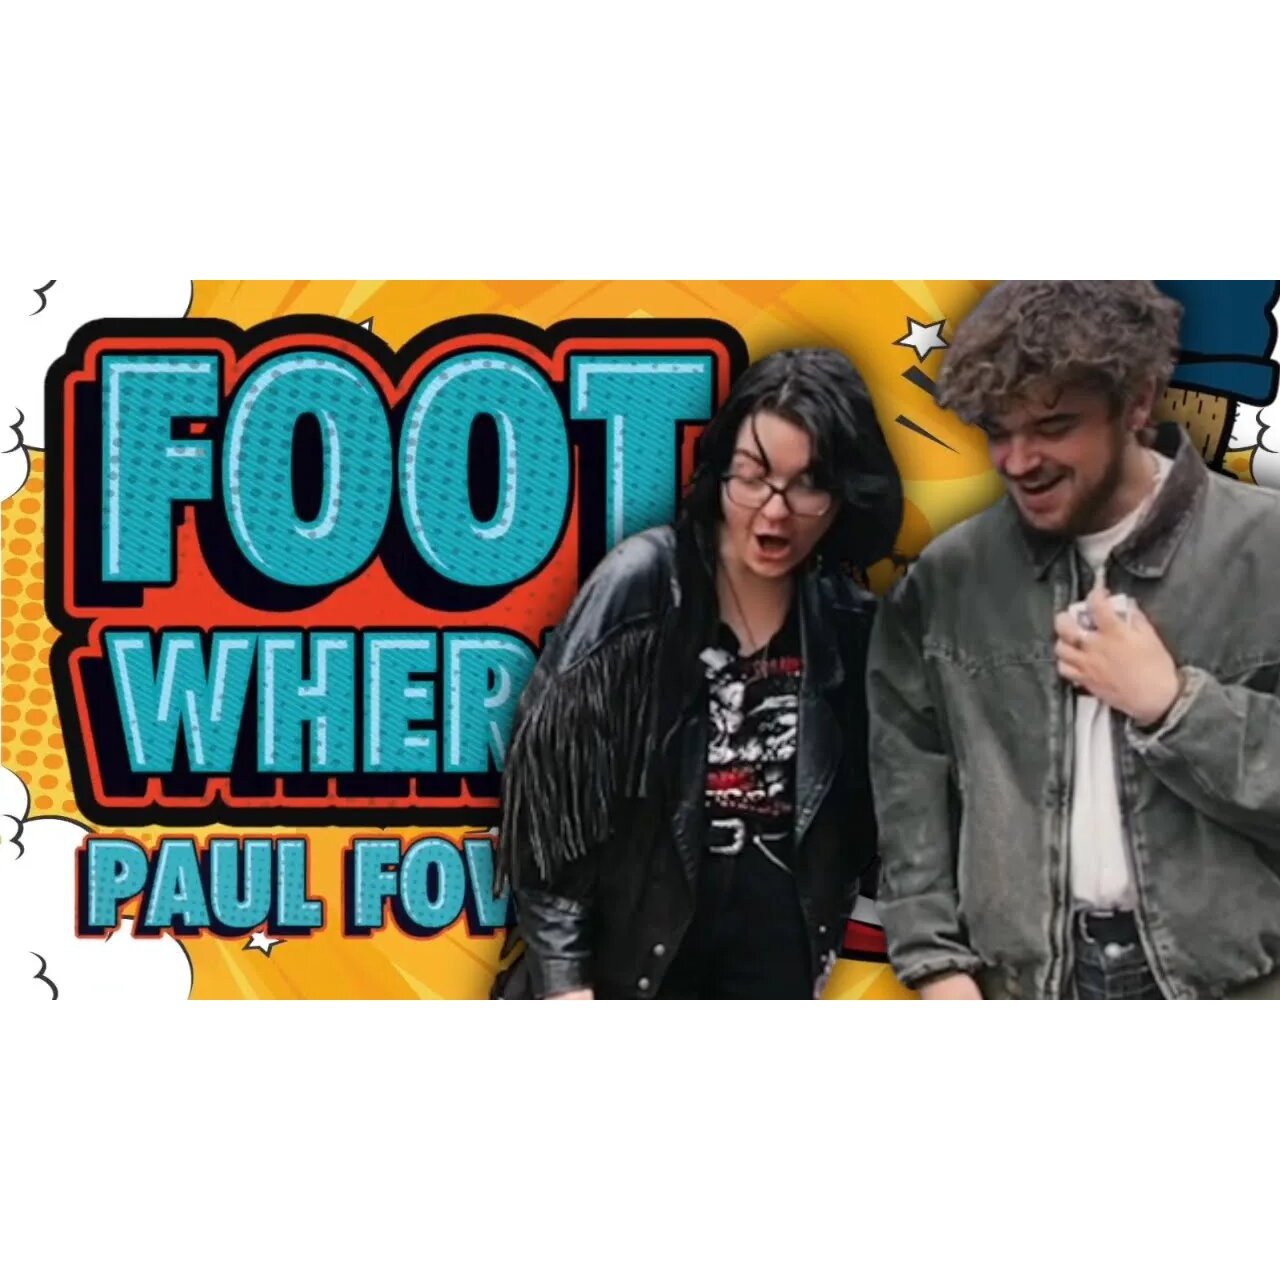 Foot Where by Paul Fowler